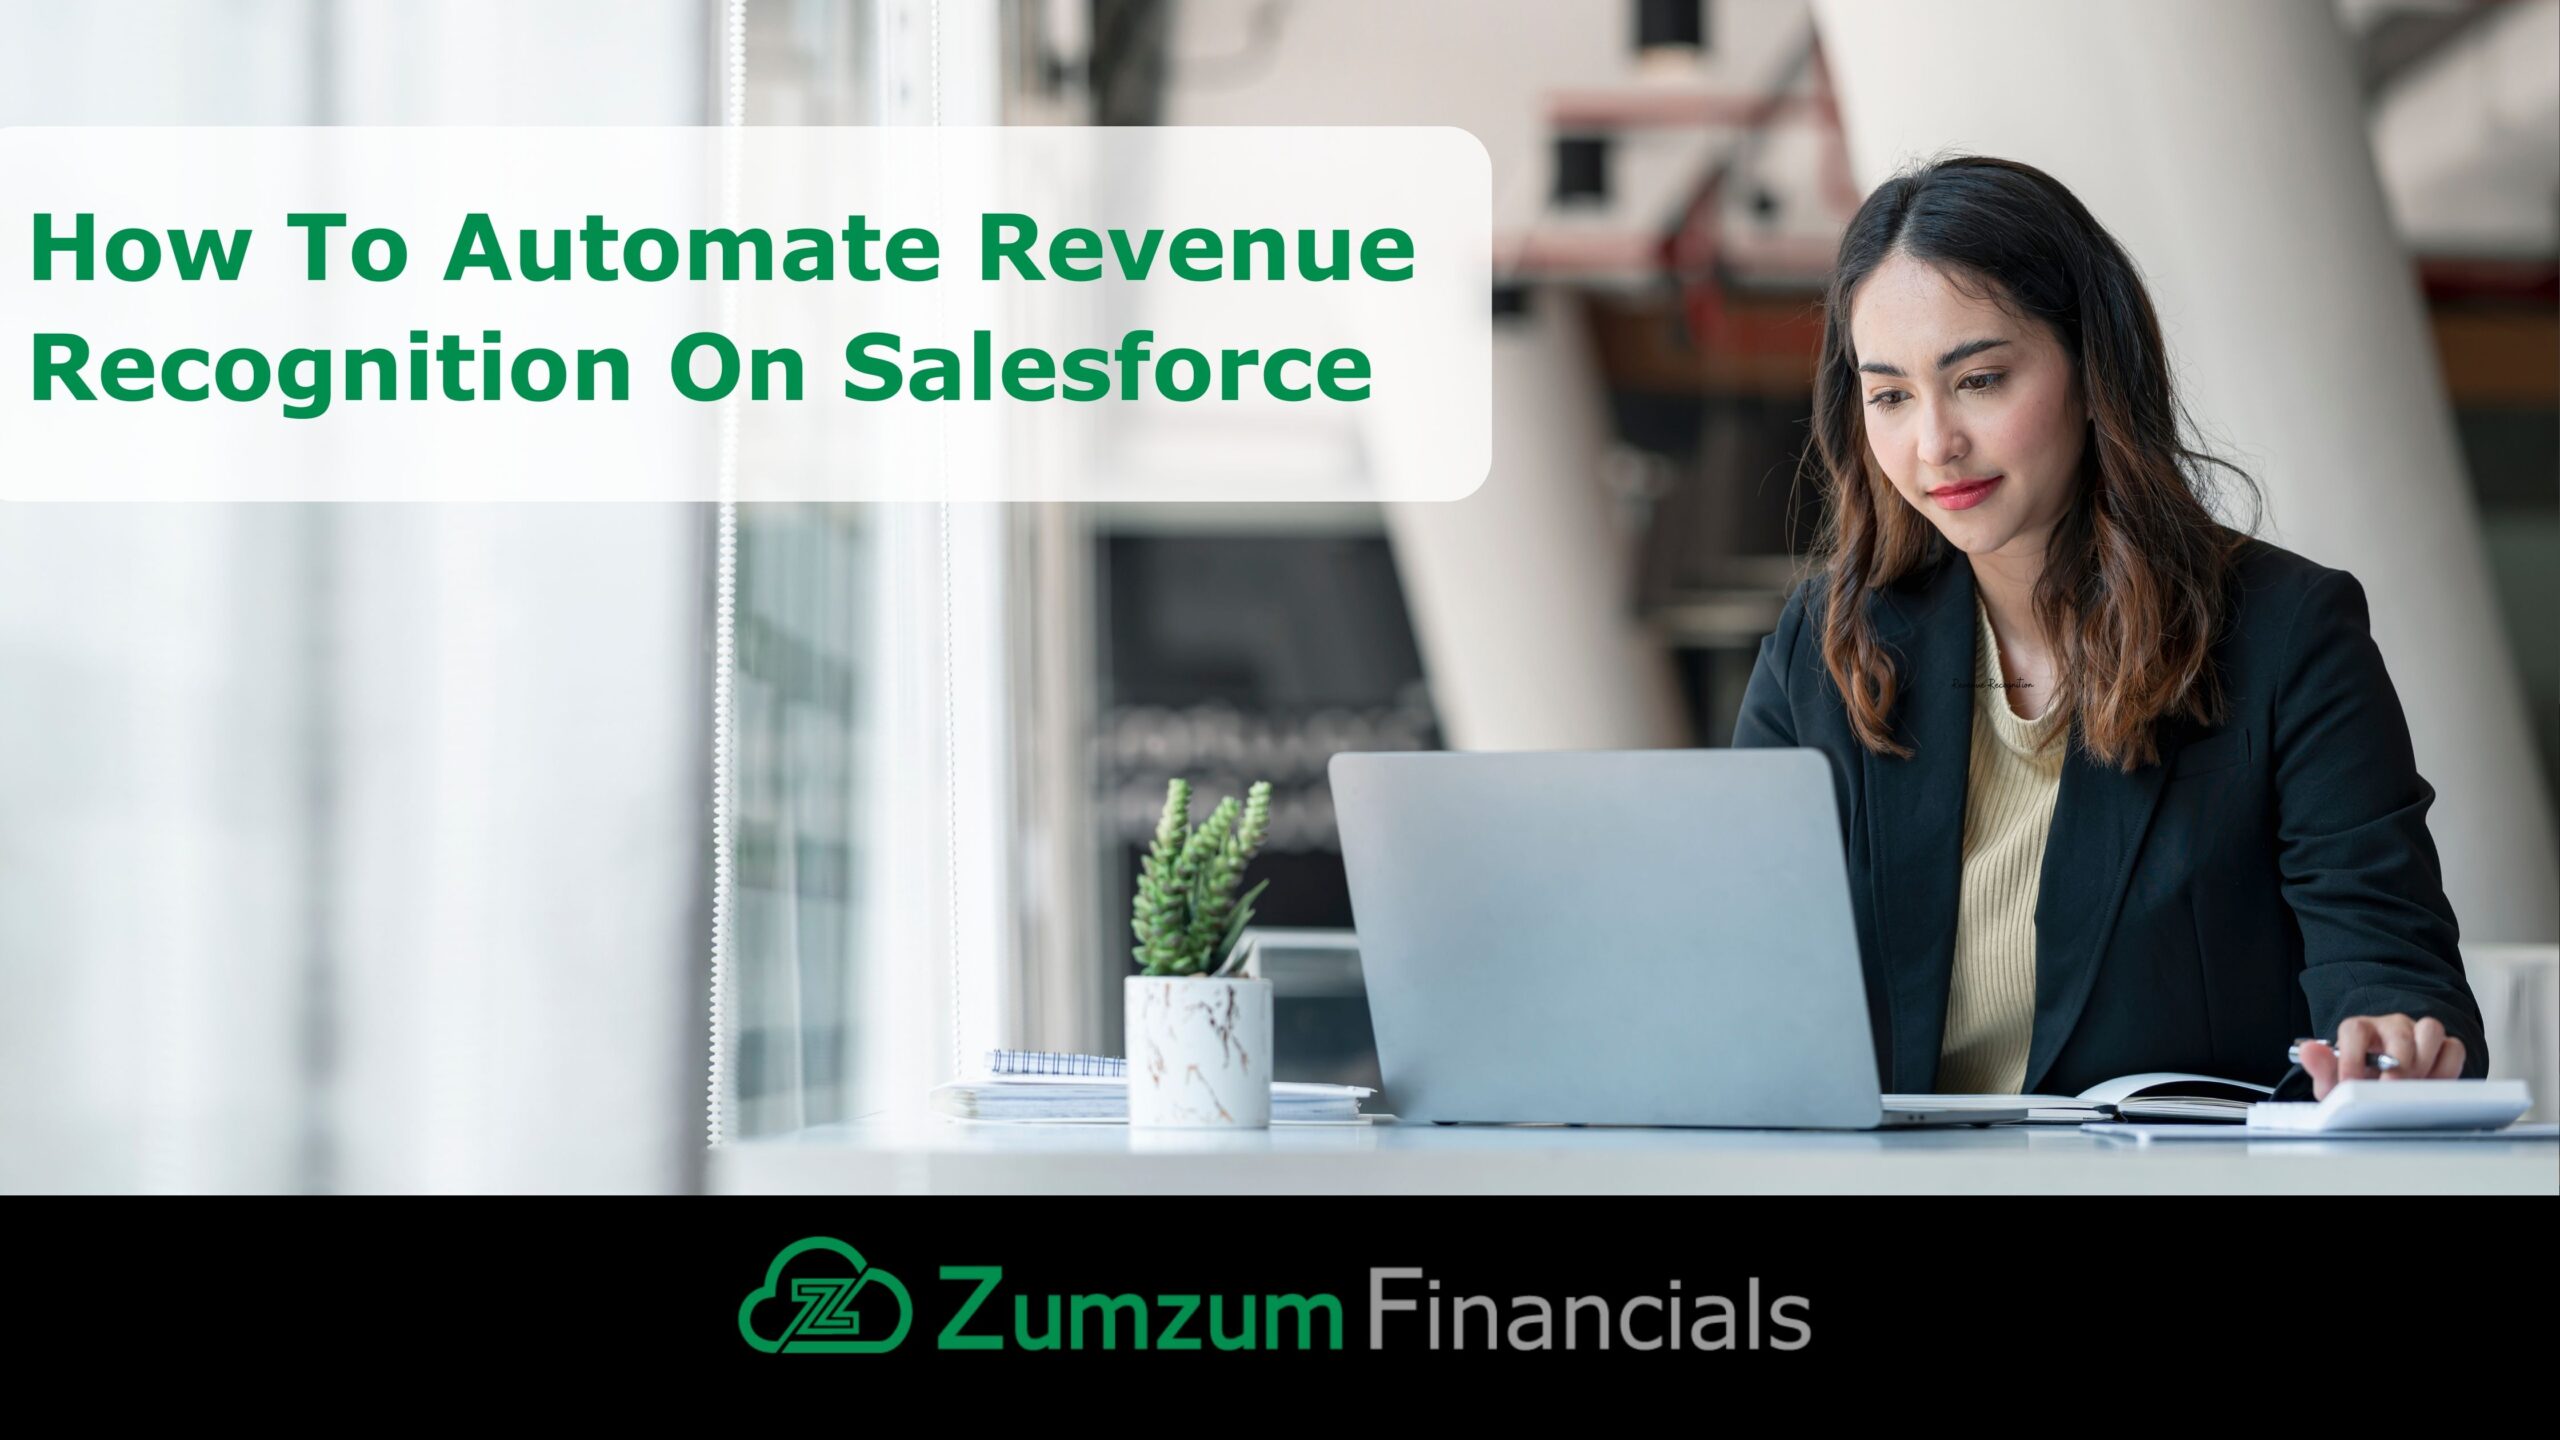 How To Automate Revenue Recognition On Salesforce